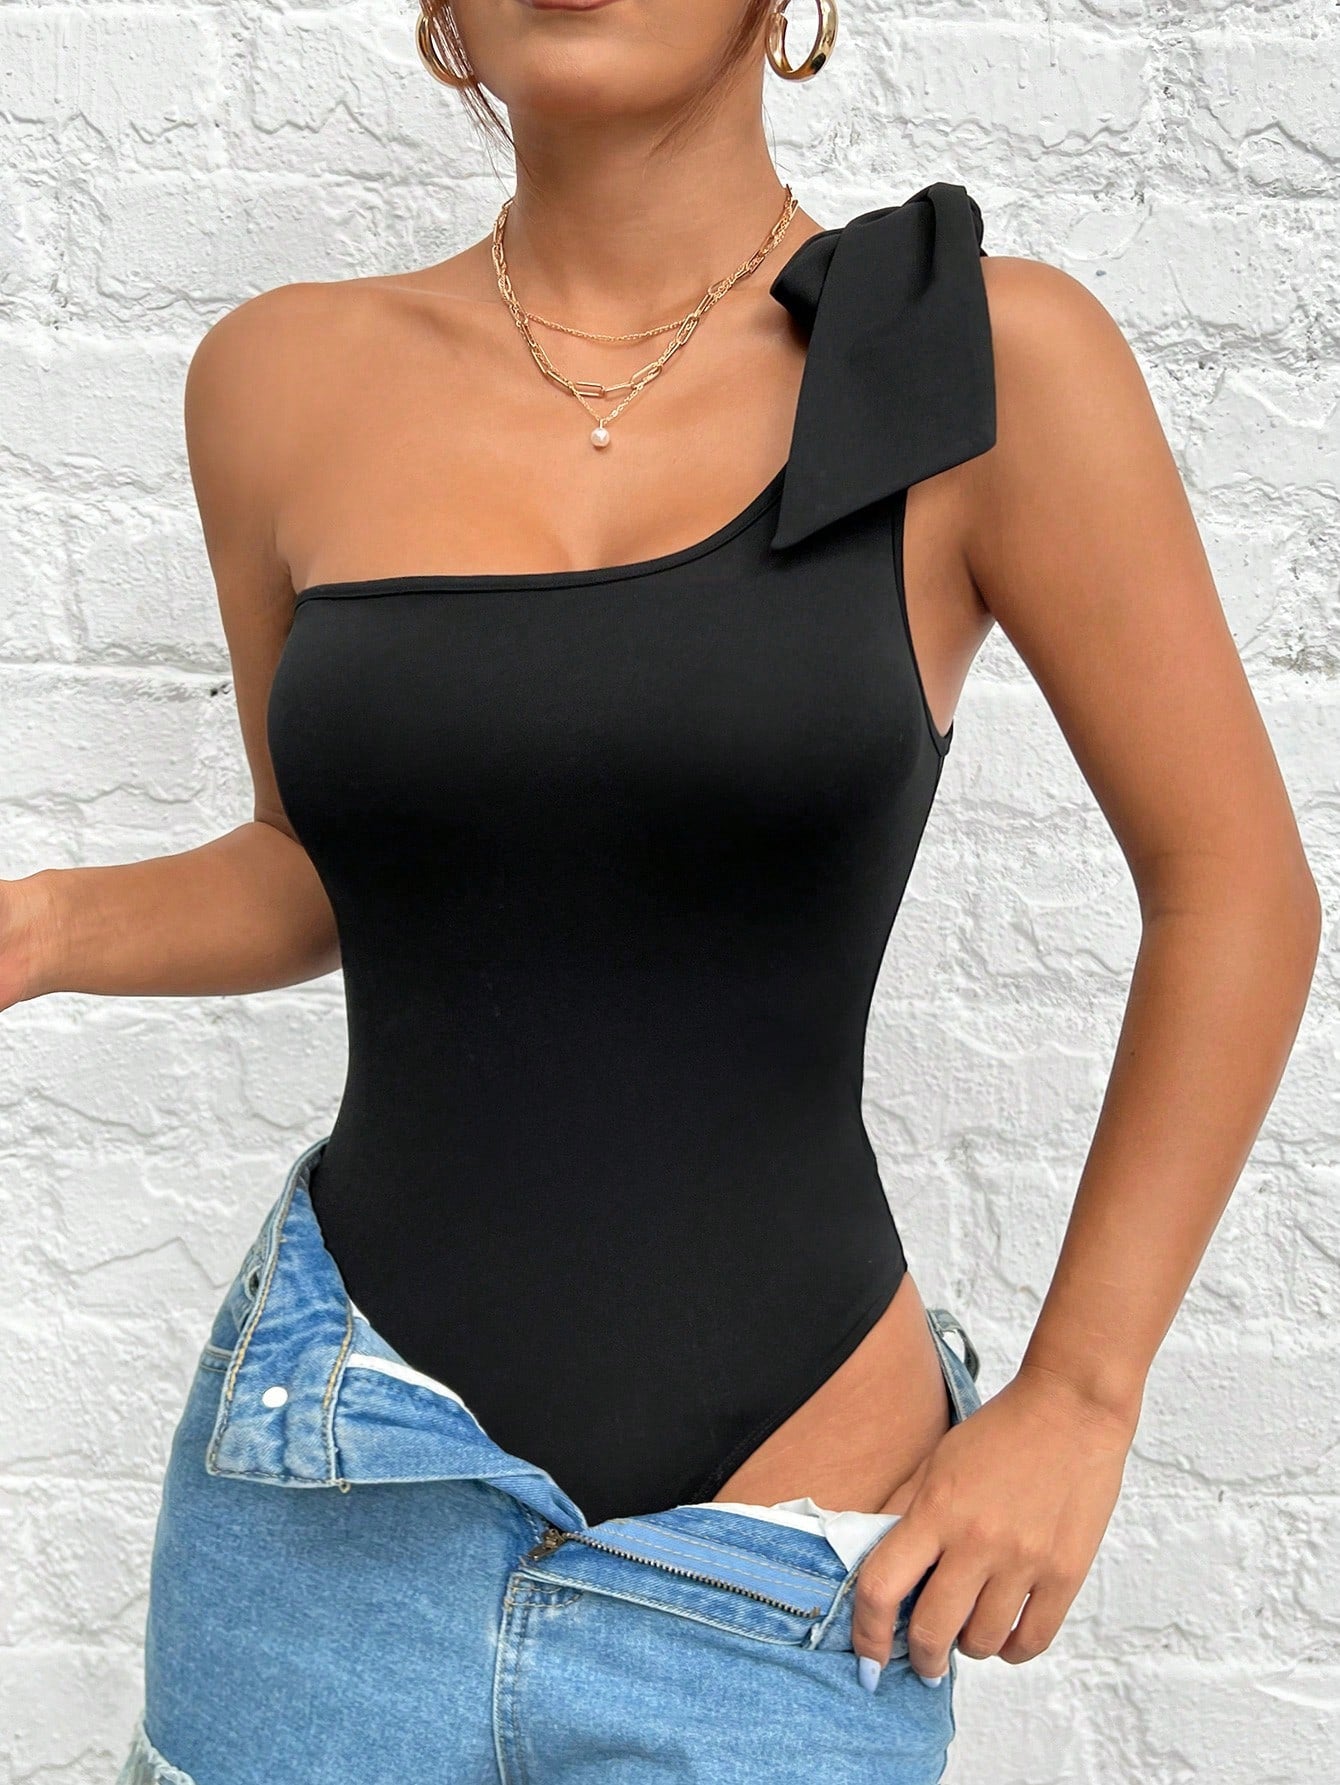 One Shoulder Tight Black Bodysuit With Knot Detail For Summer